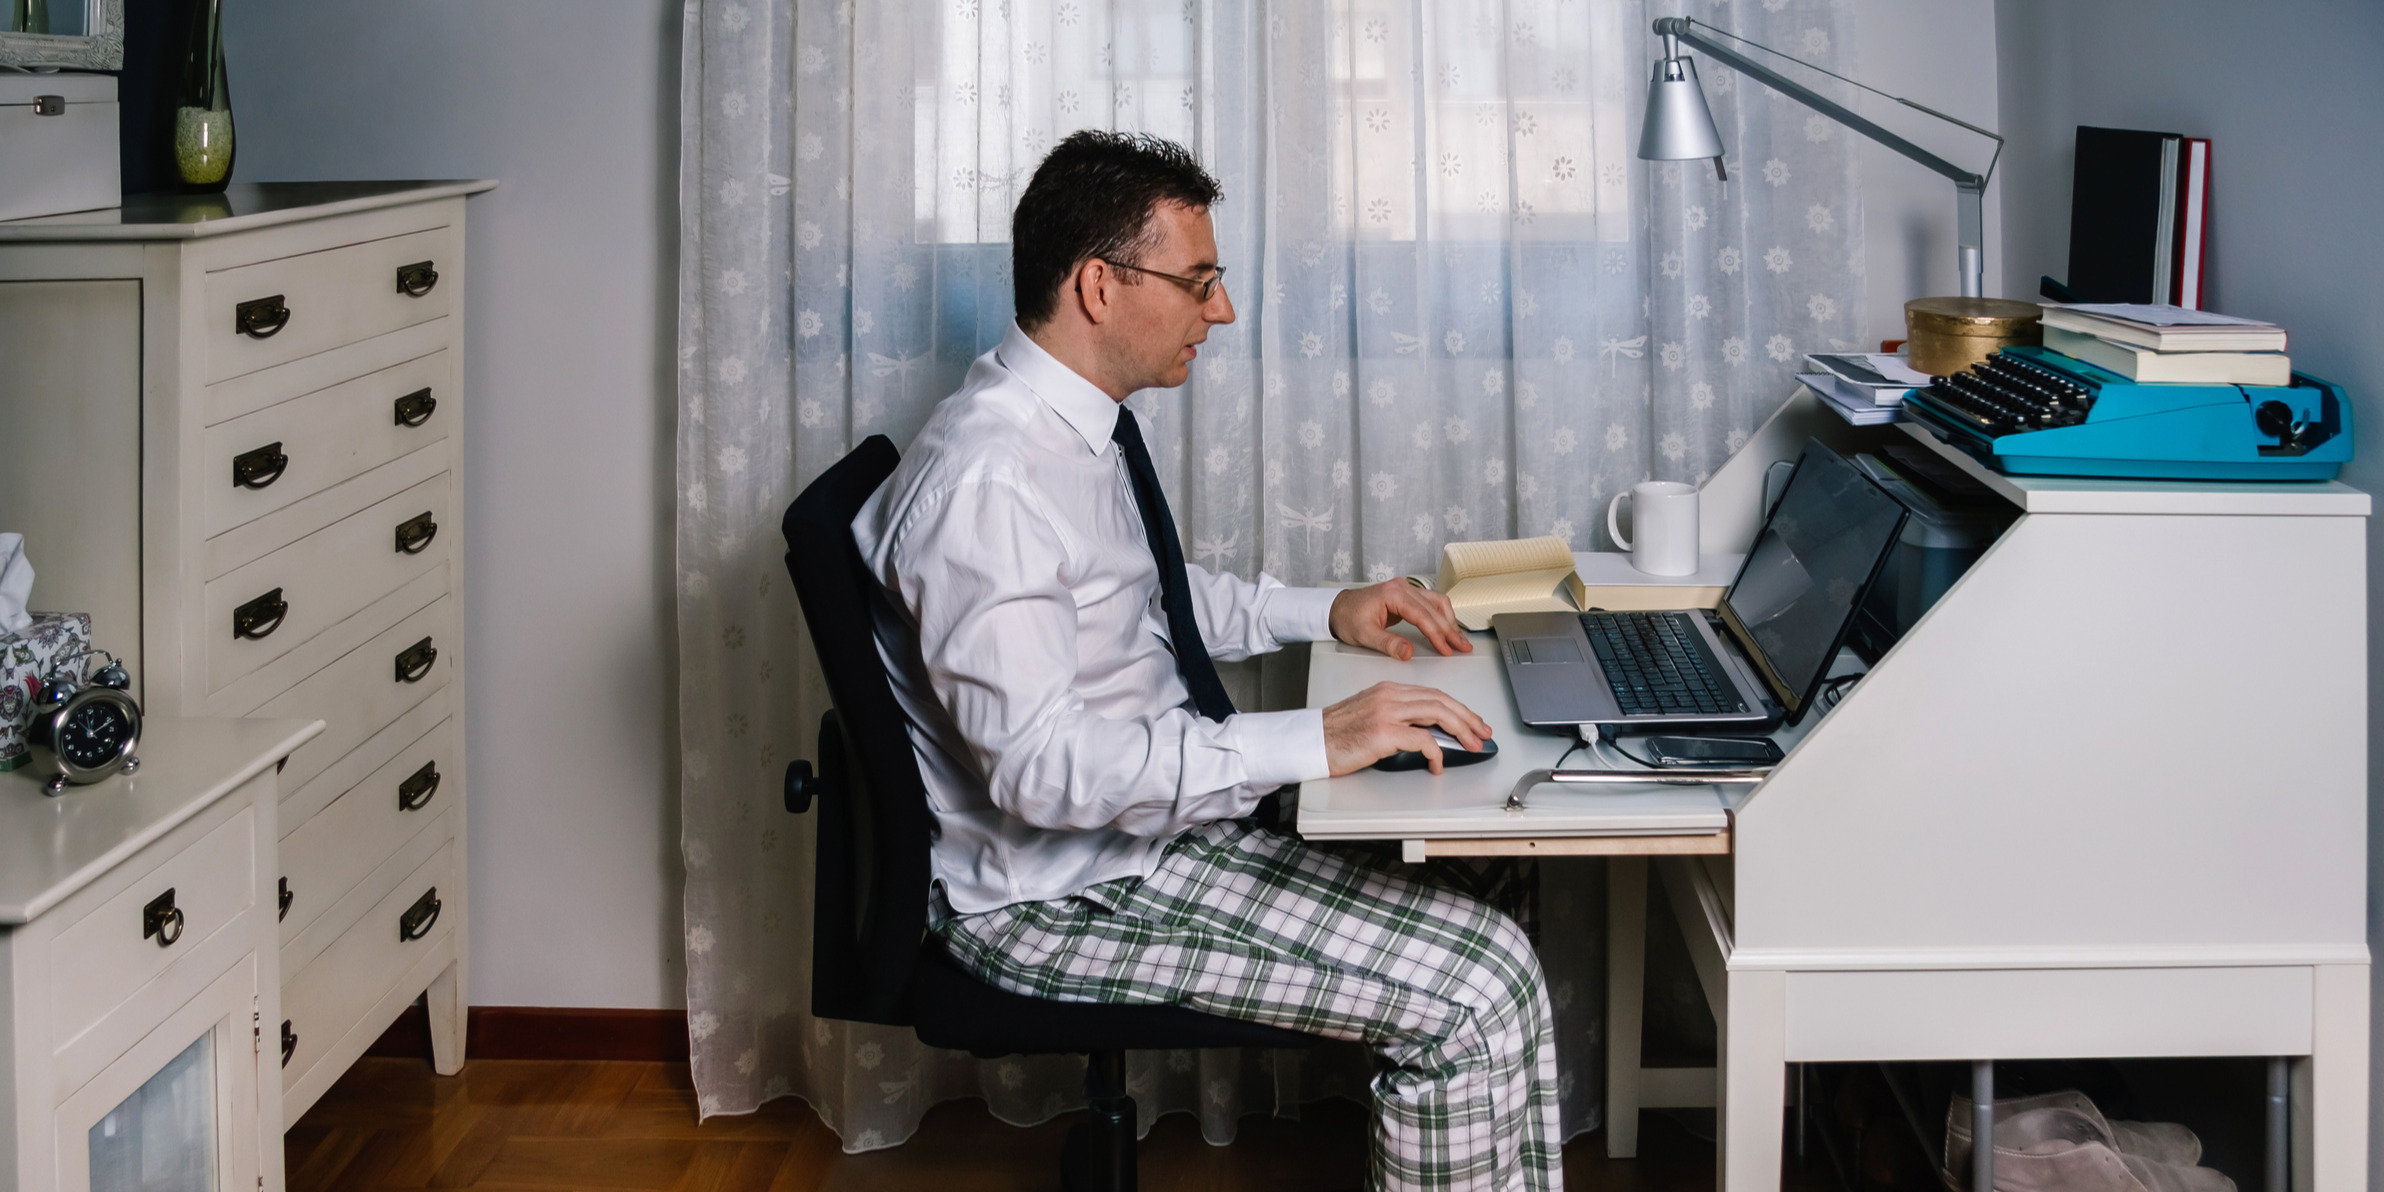 10 GIFs That Sum Up Working From Home in Sales